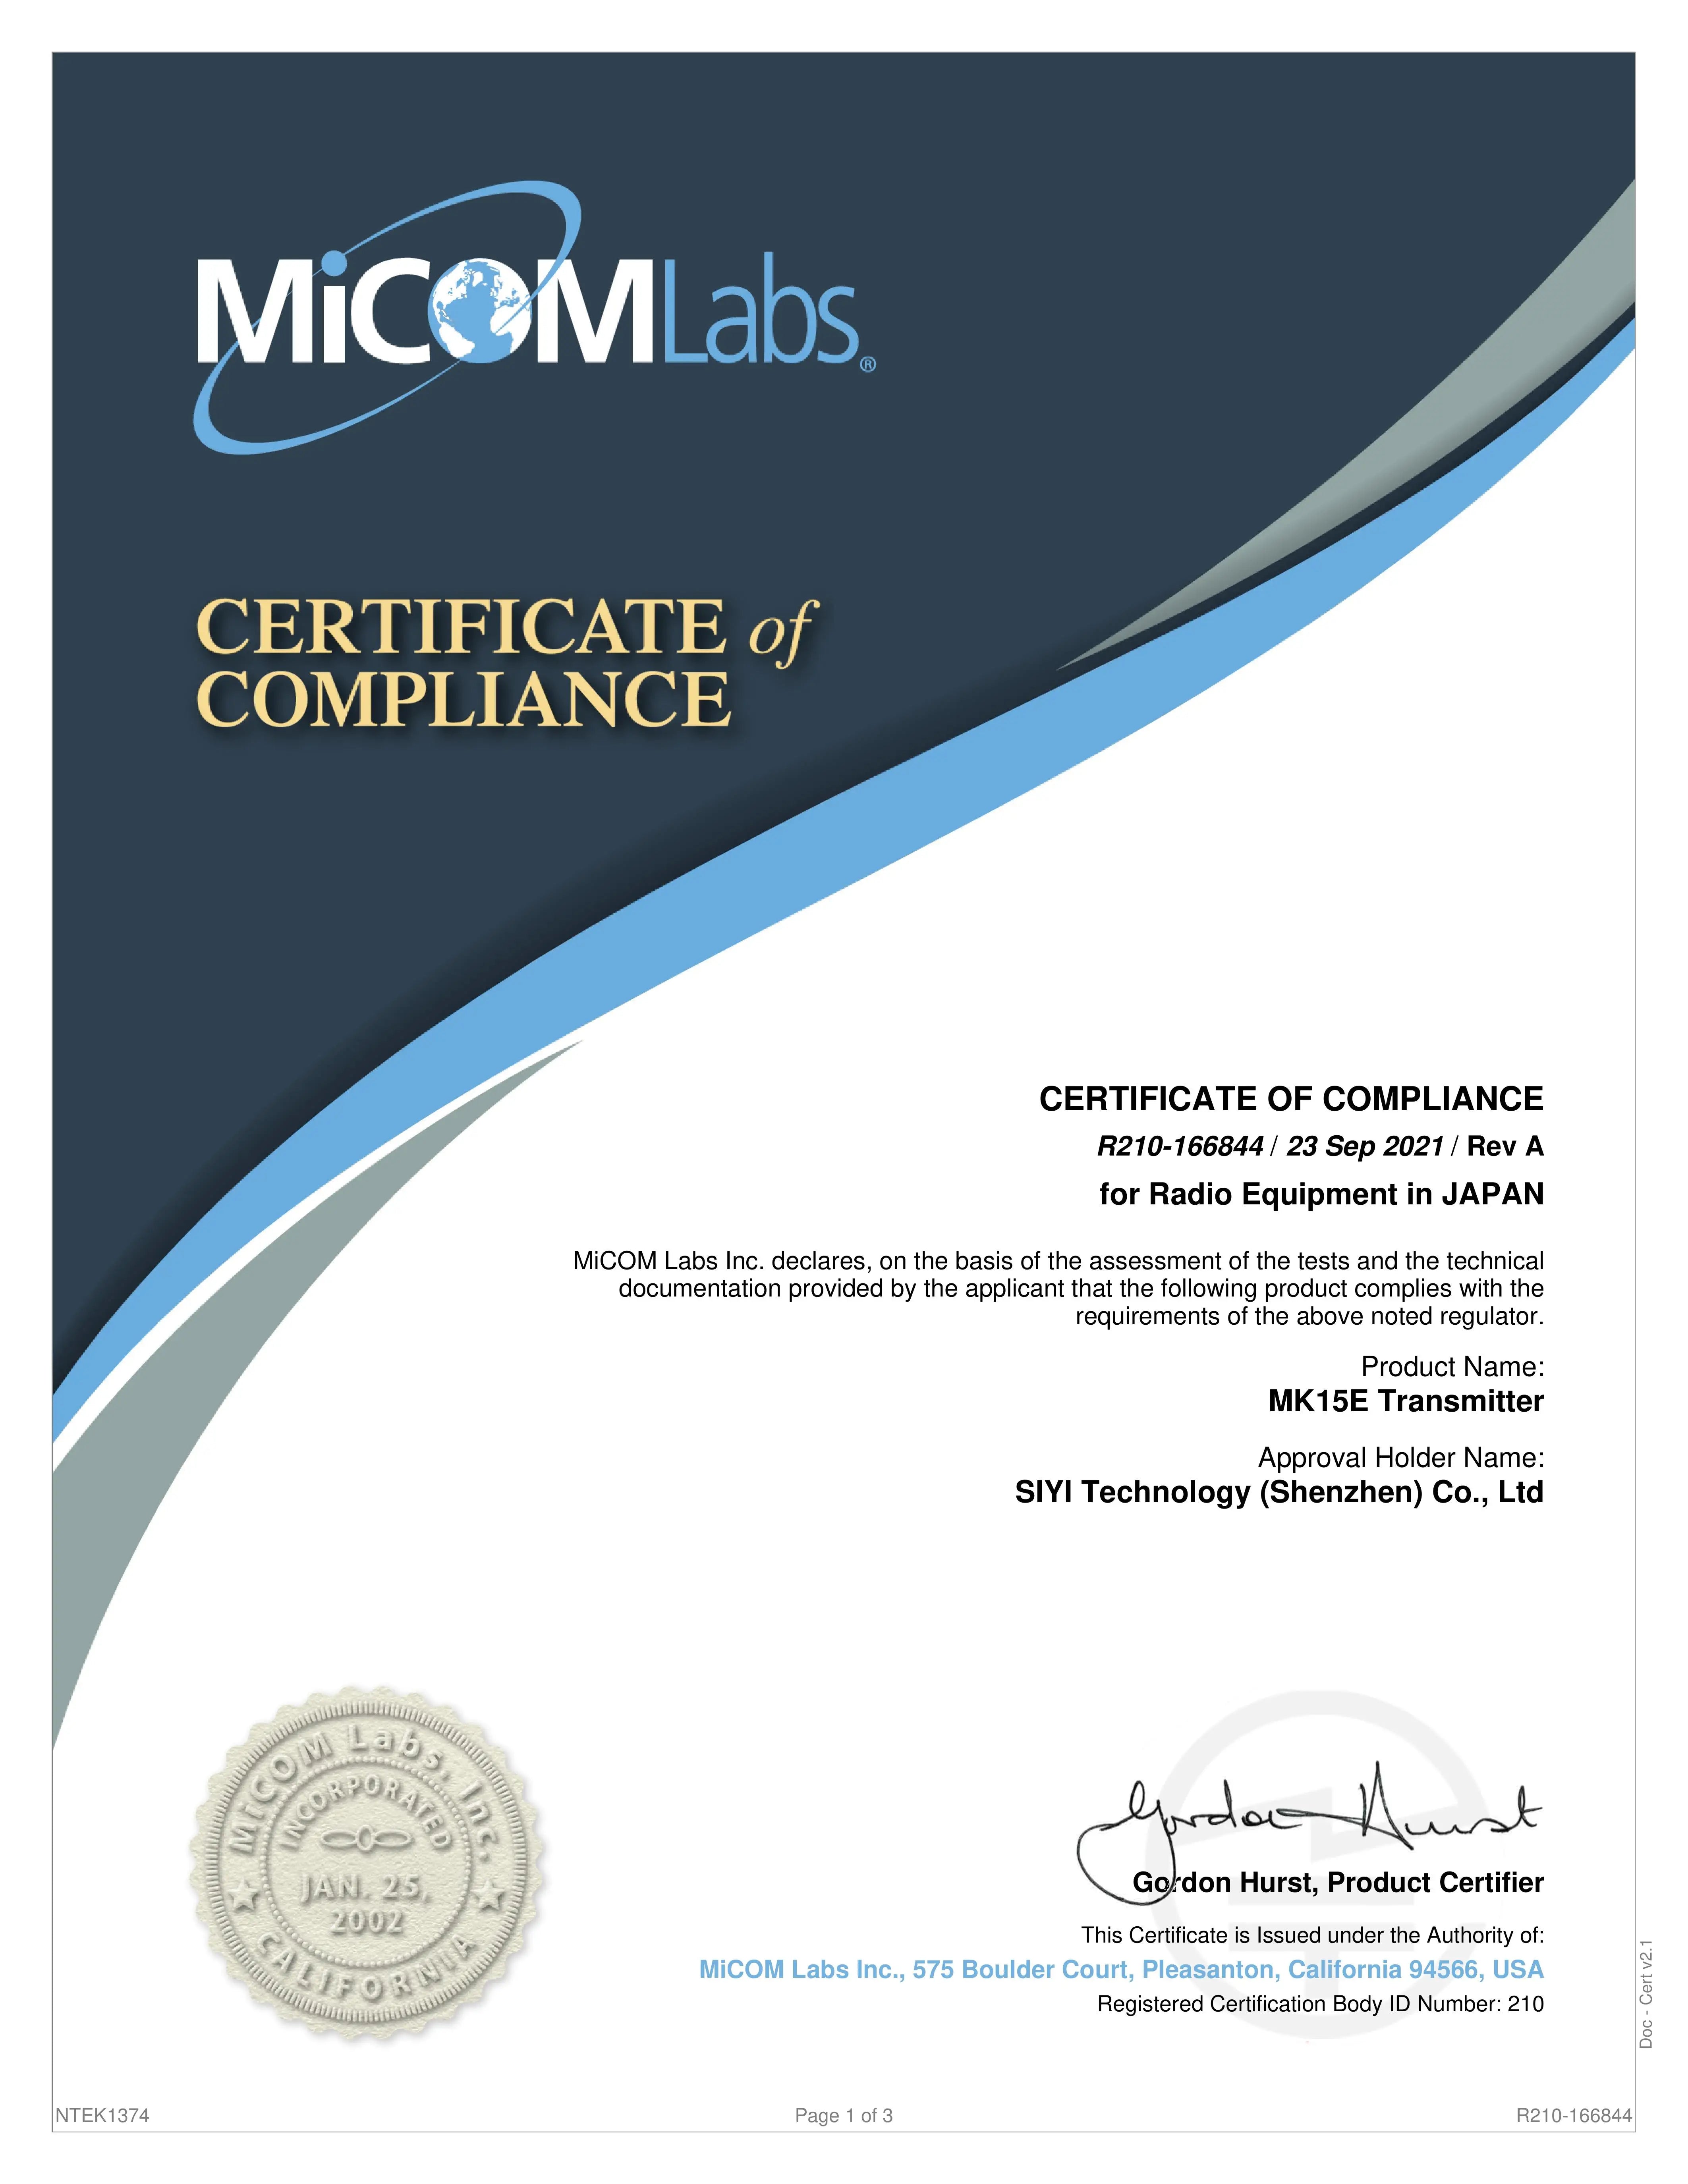 MiCOM Labs Inc. declares that the following product complies with the requirements of